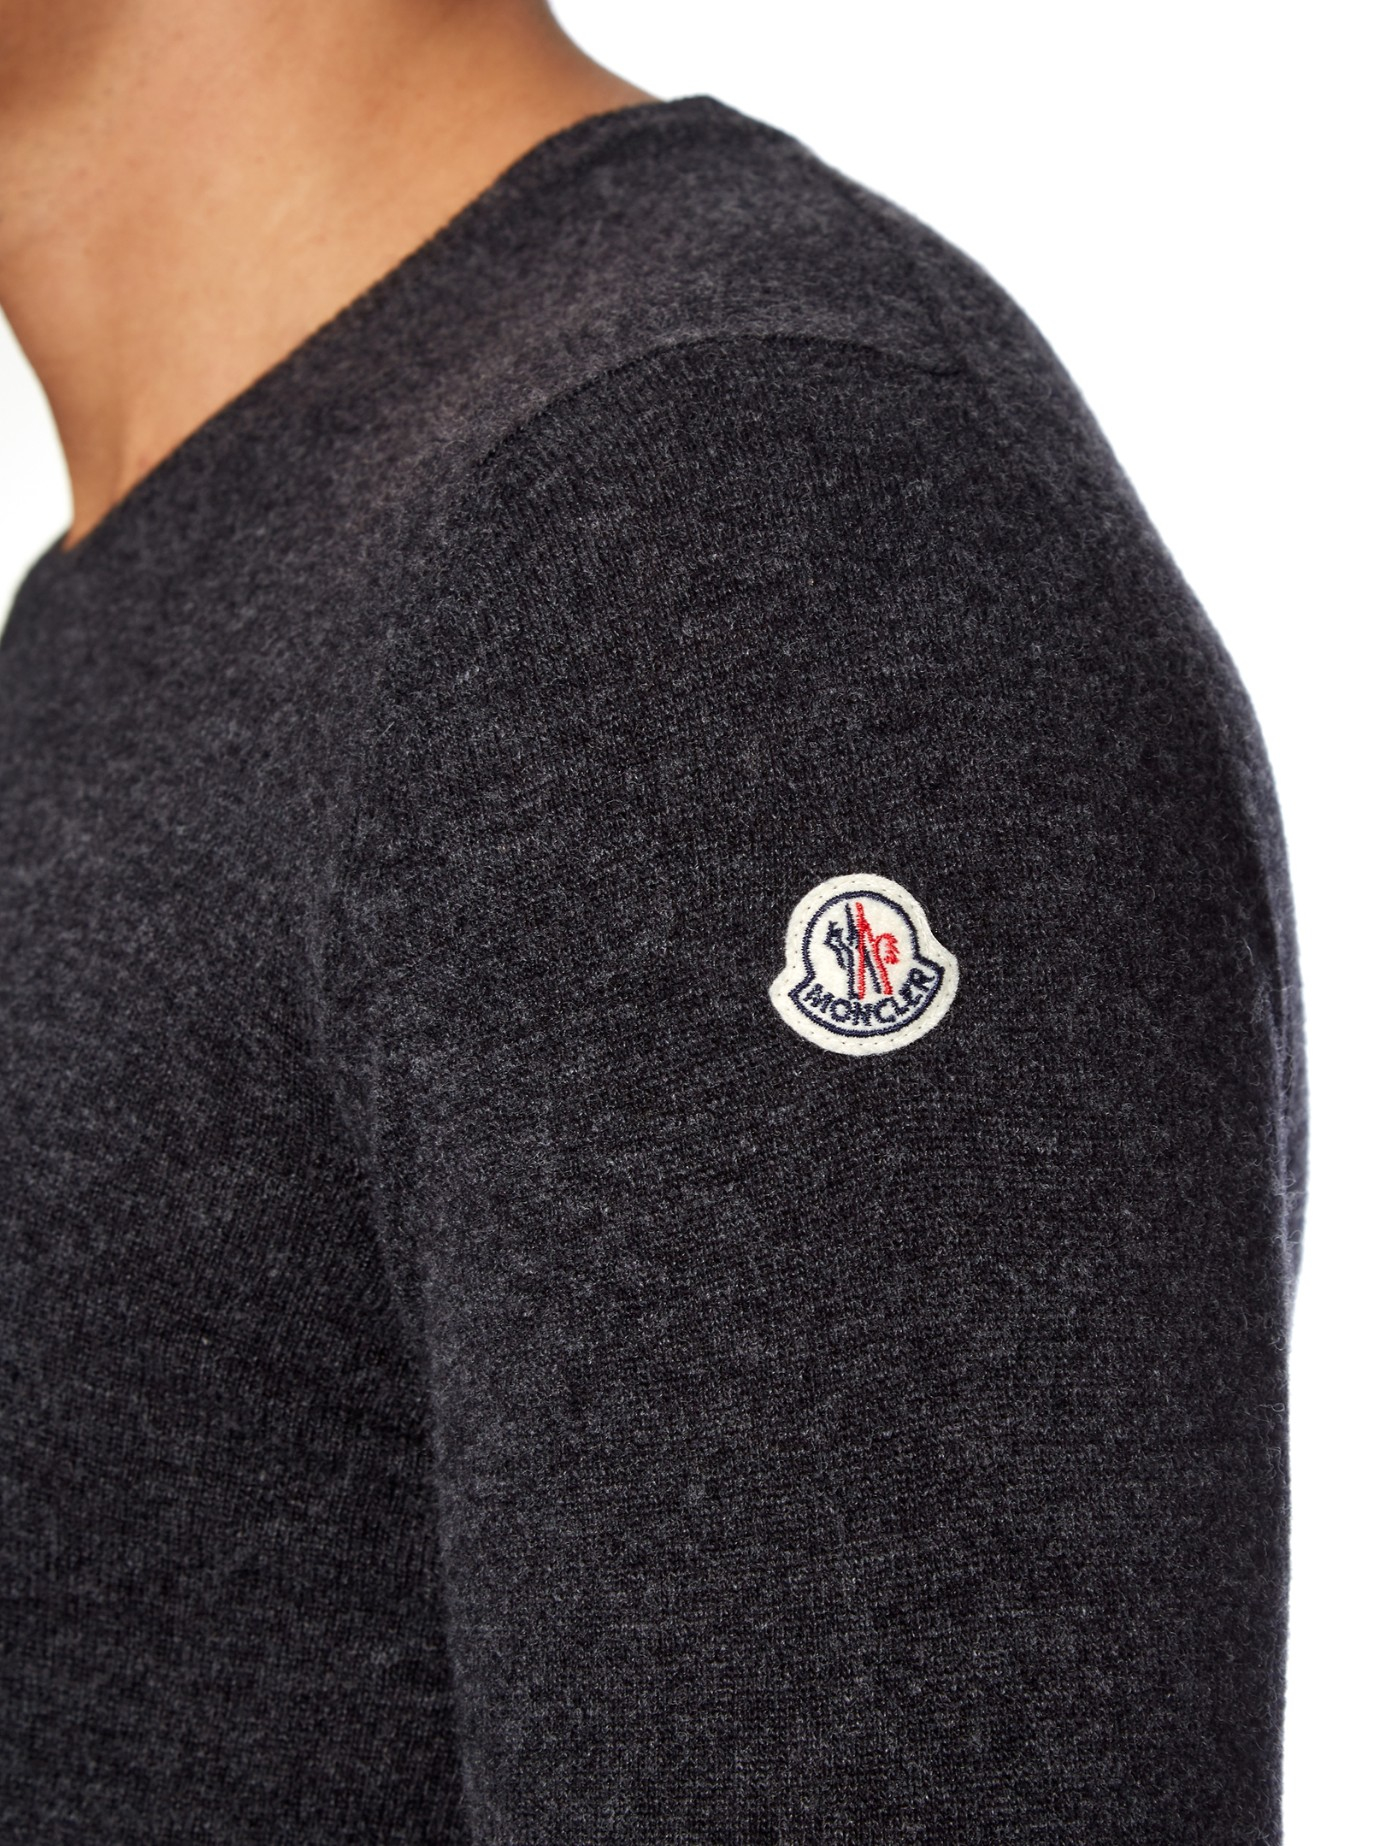 Moncler Crew-neck Wool Sweater in Charcoal (Grey) for Men - Lyst